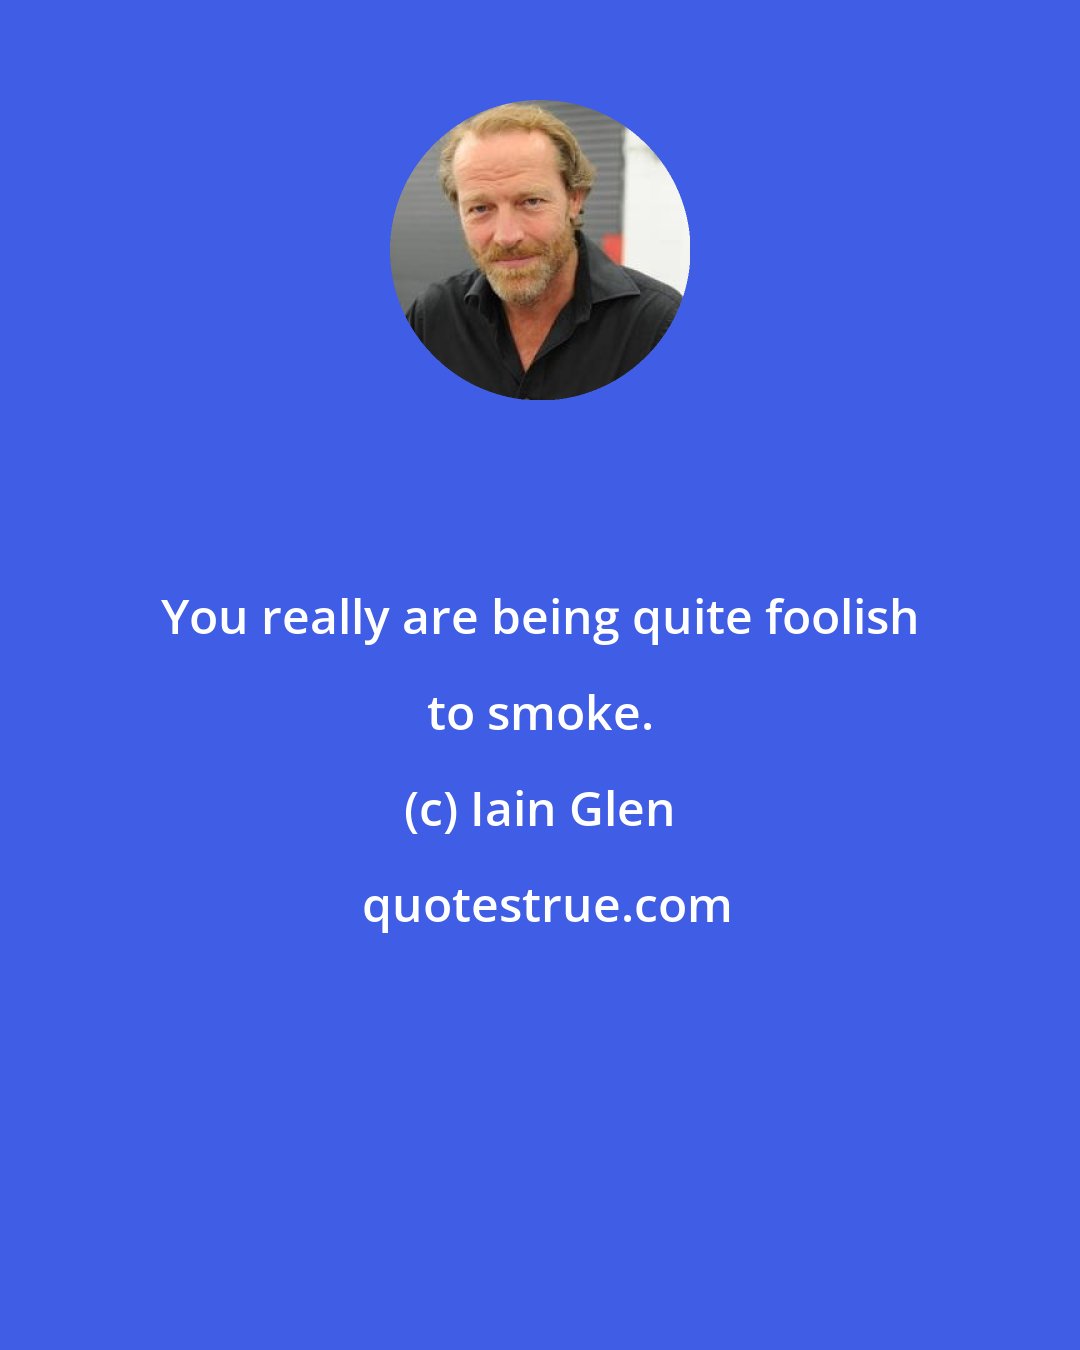 Iain Glen: You really are being quite foolish to smoke.